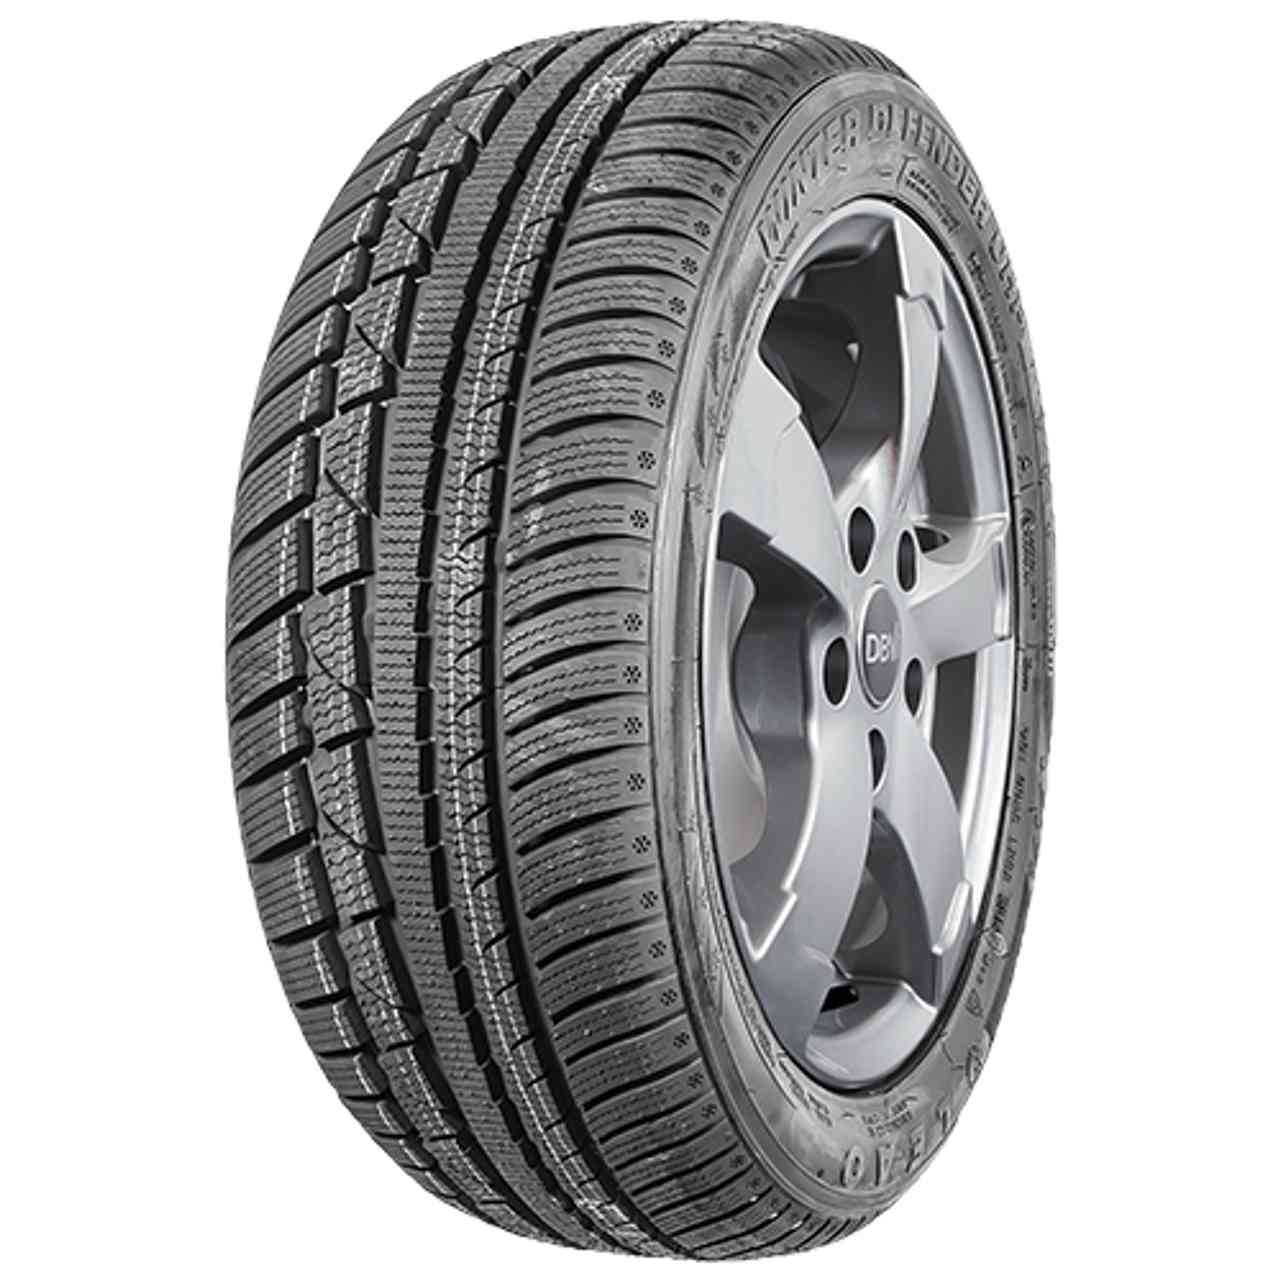 LEAO WINTER DEFENDER UHP 185/55R15 86H BSW